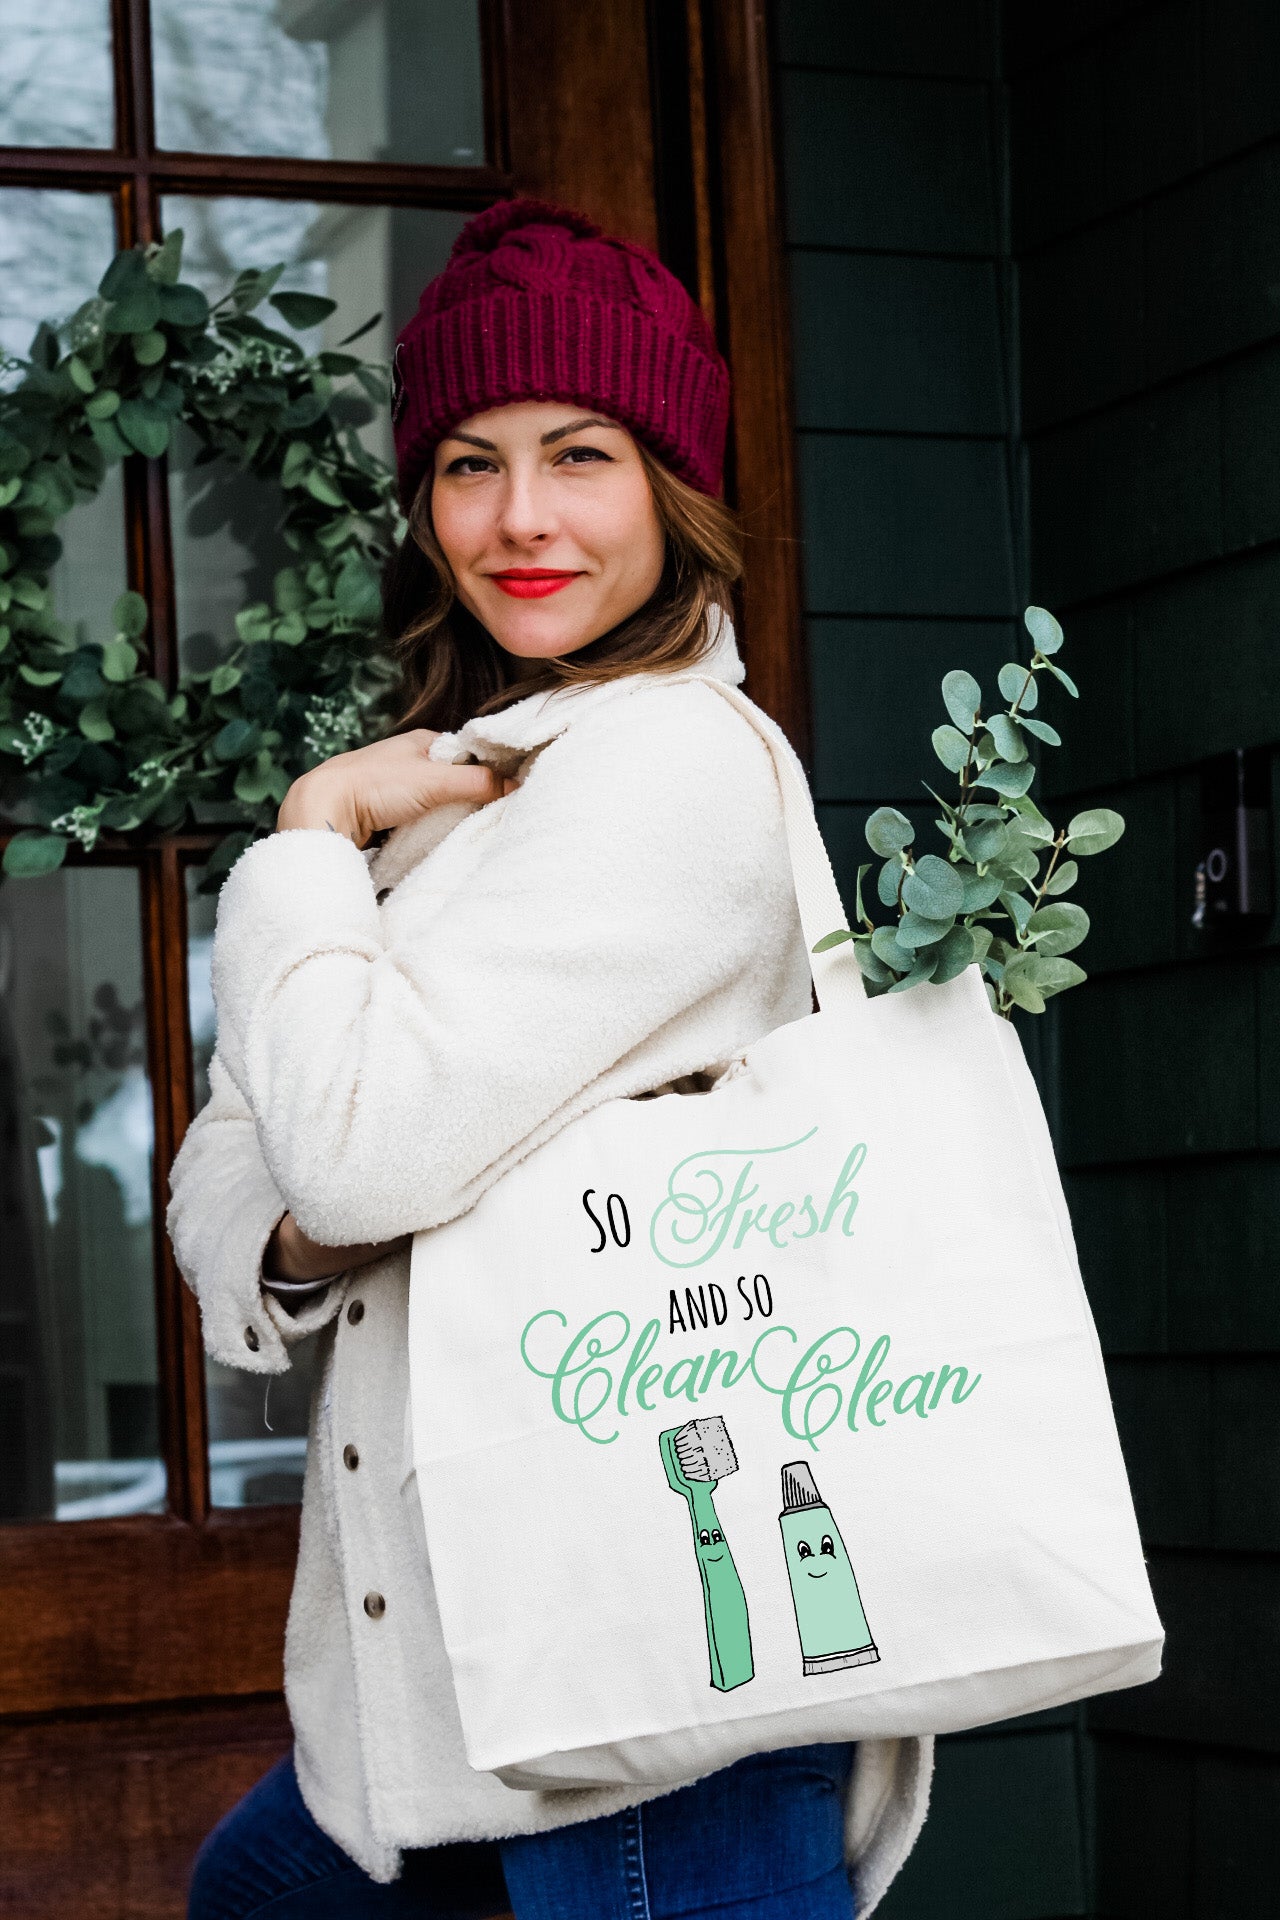 a woman carrying a shopping bag that says 50 fresh and so green clean